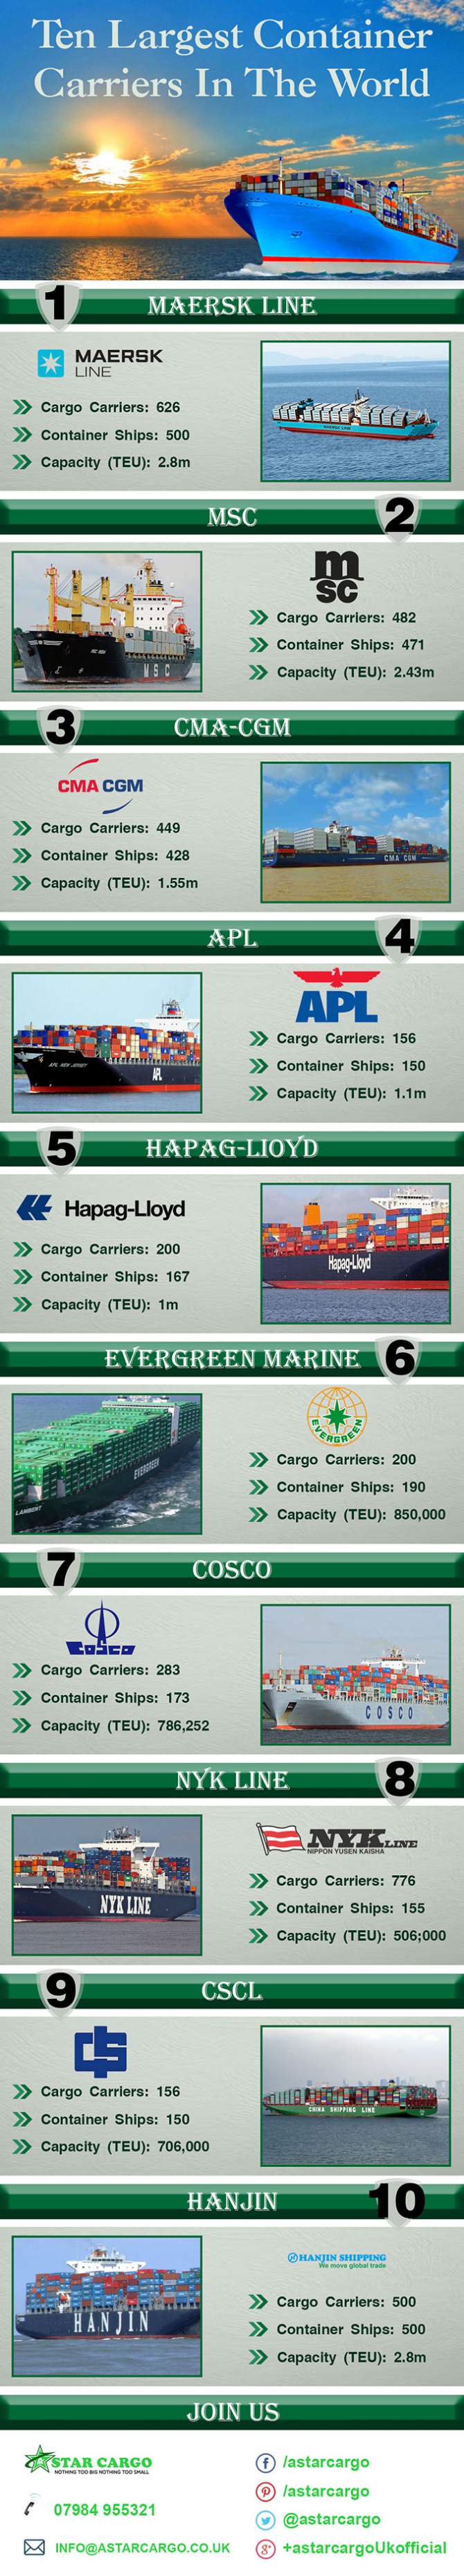 10 Largest Container Carriers in the World